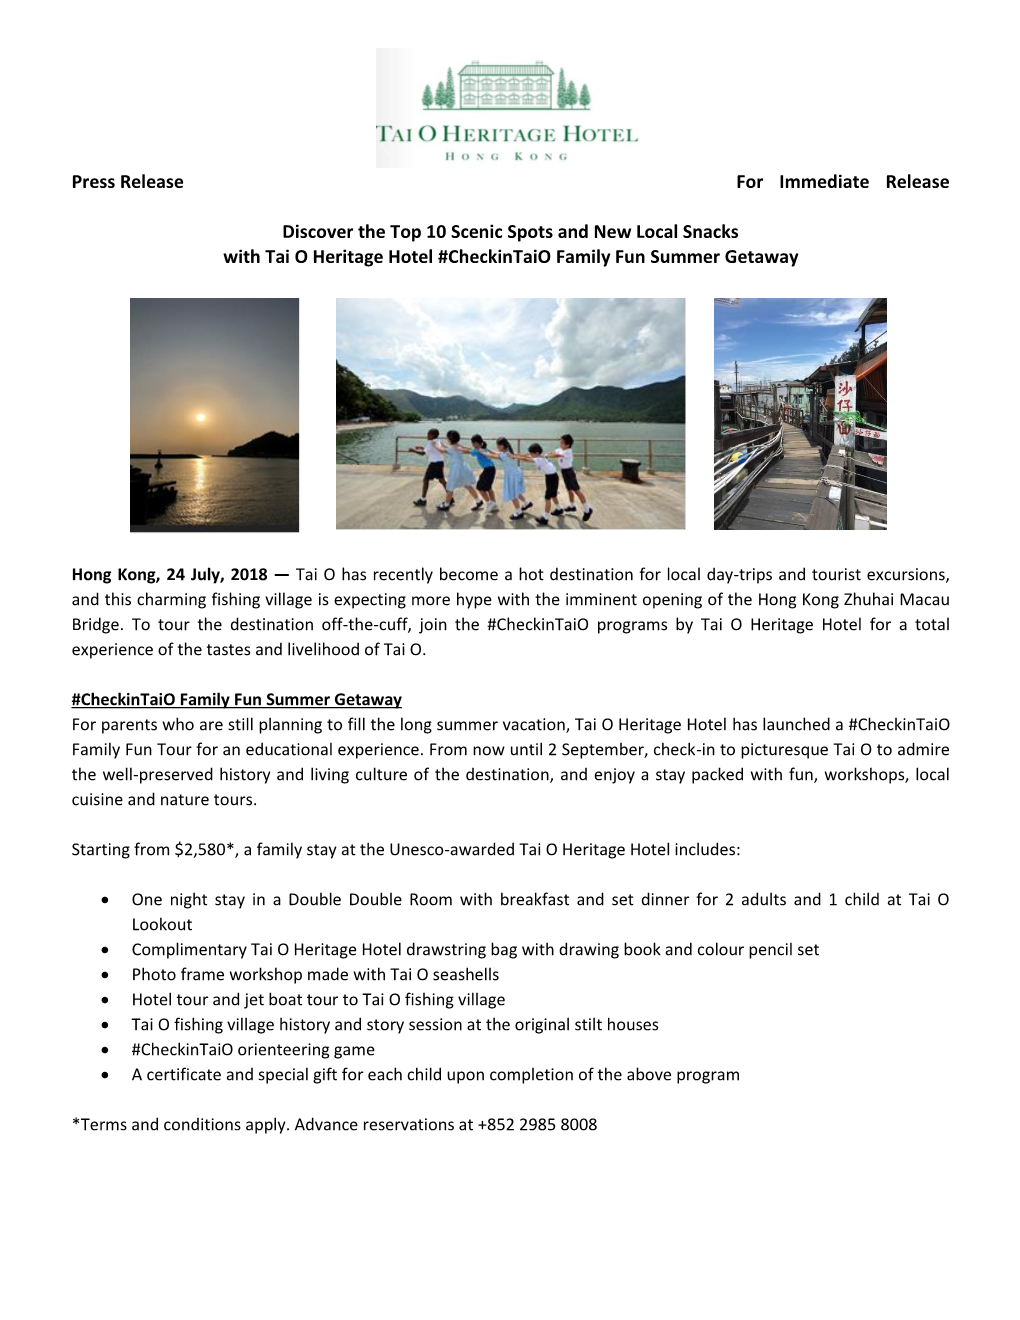 Press Release for Immediate Release Discover the Top 10 Scenic Spots and New Local Snacks with Tai O Heritage Hotel #Checkintai